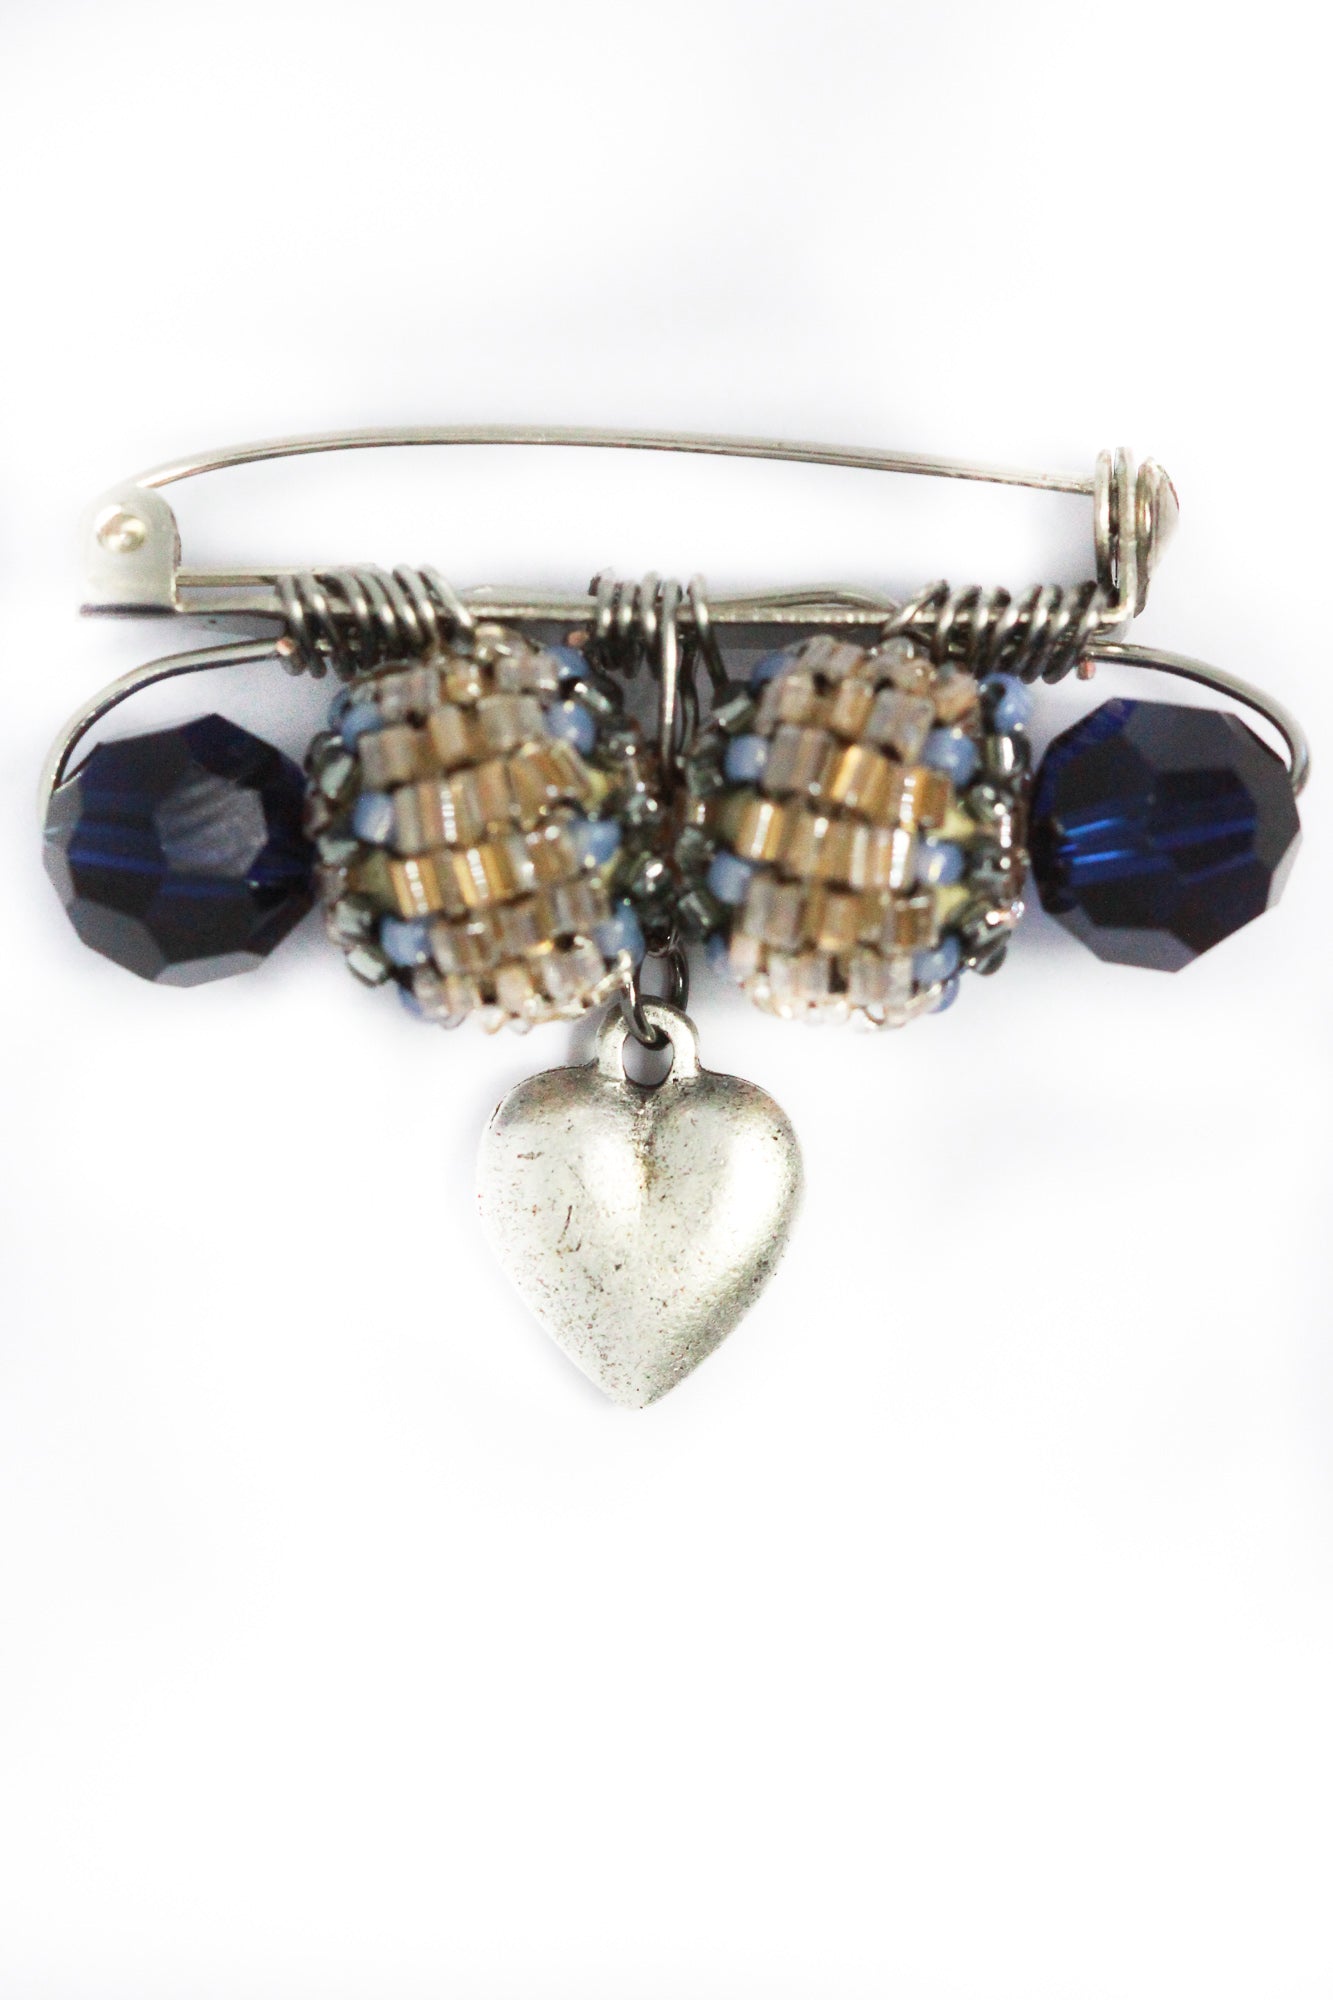 Vintage Inspired Silver Heart And Blue Crystal Brooch - Designer Sweetheart Inspired Jewelry